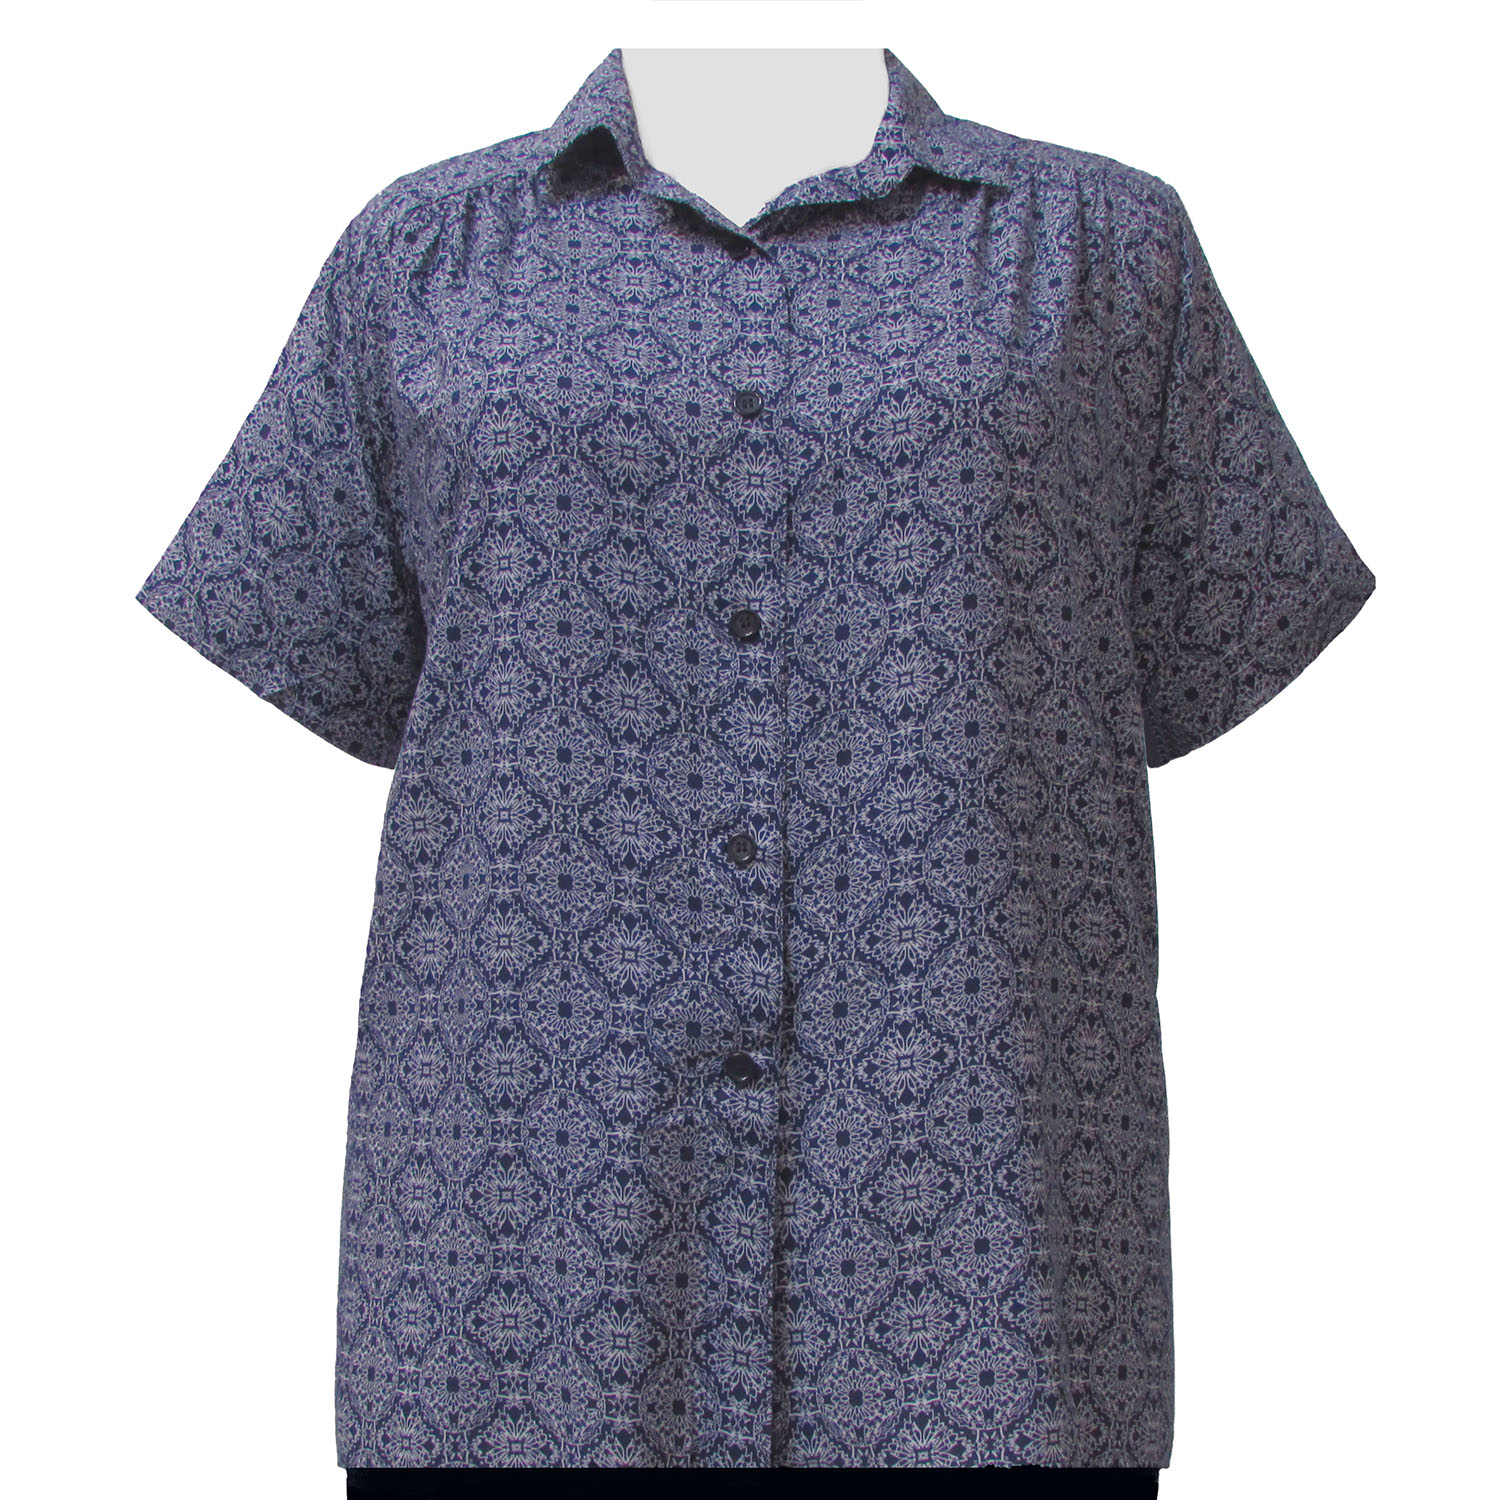 A Personal Touch Navy Spirograph Short Sleeve Tunic with Shirring Plus Size Woman's Blouse